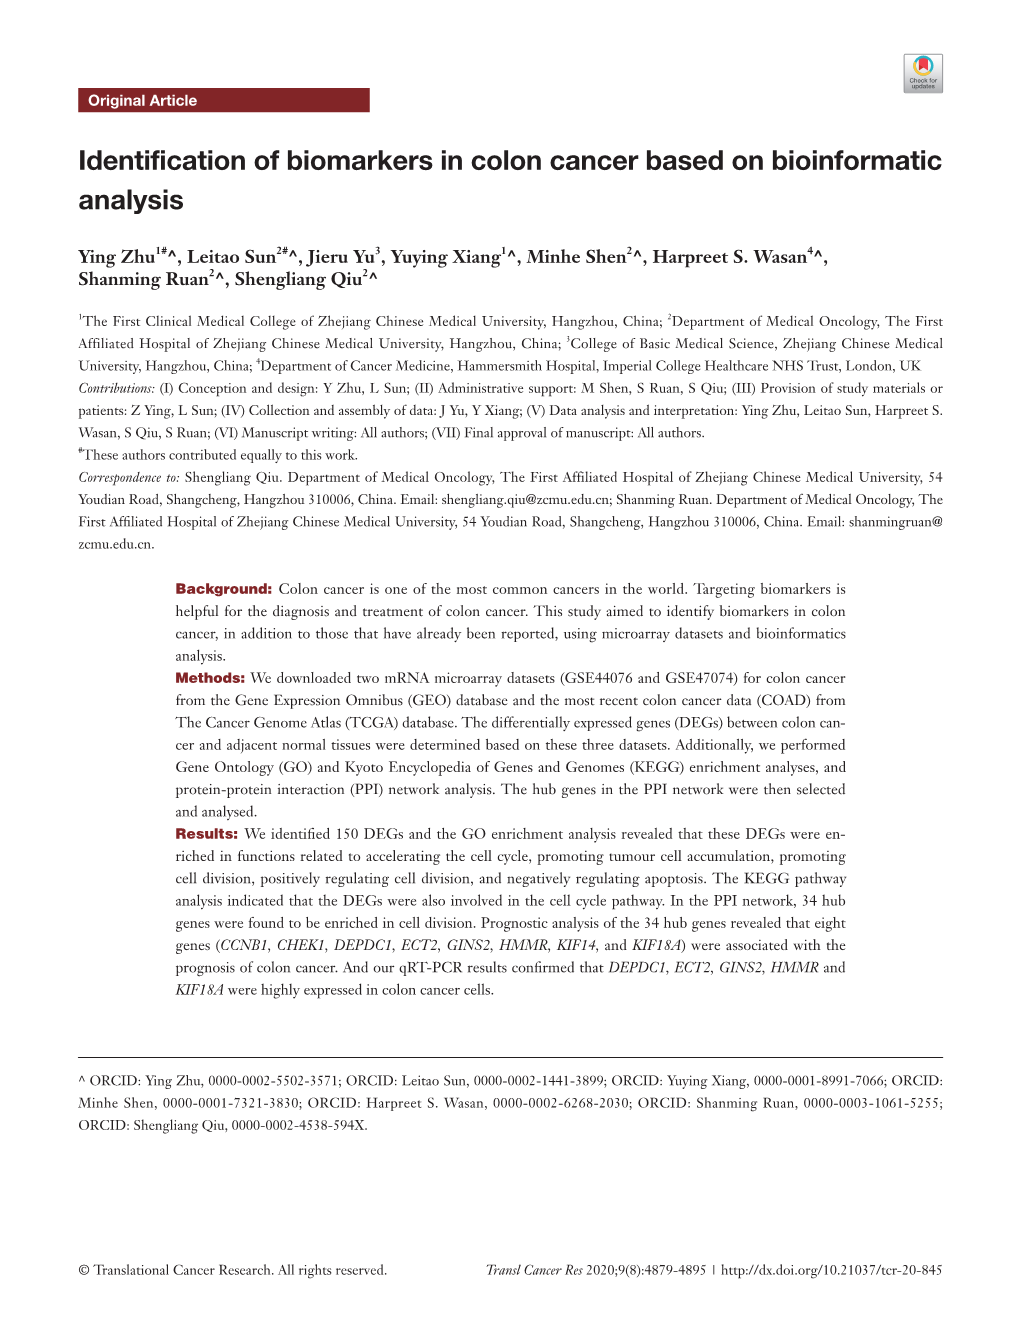 Identification of Biomarkers in Colon Cancer Based on Bioinformatic Analysis